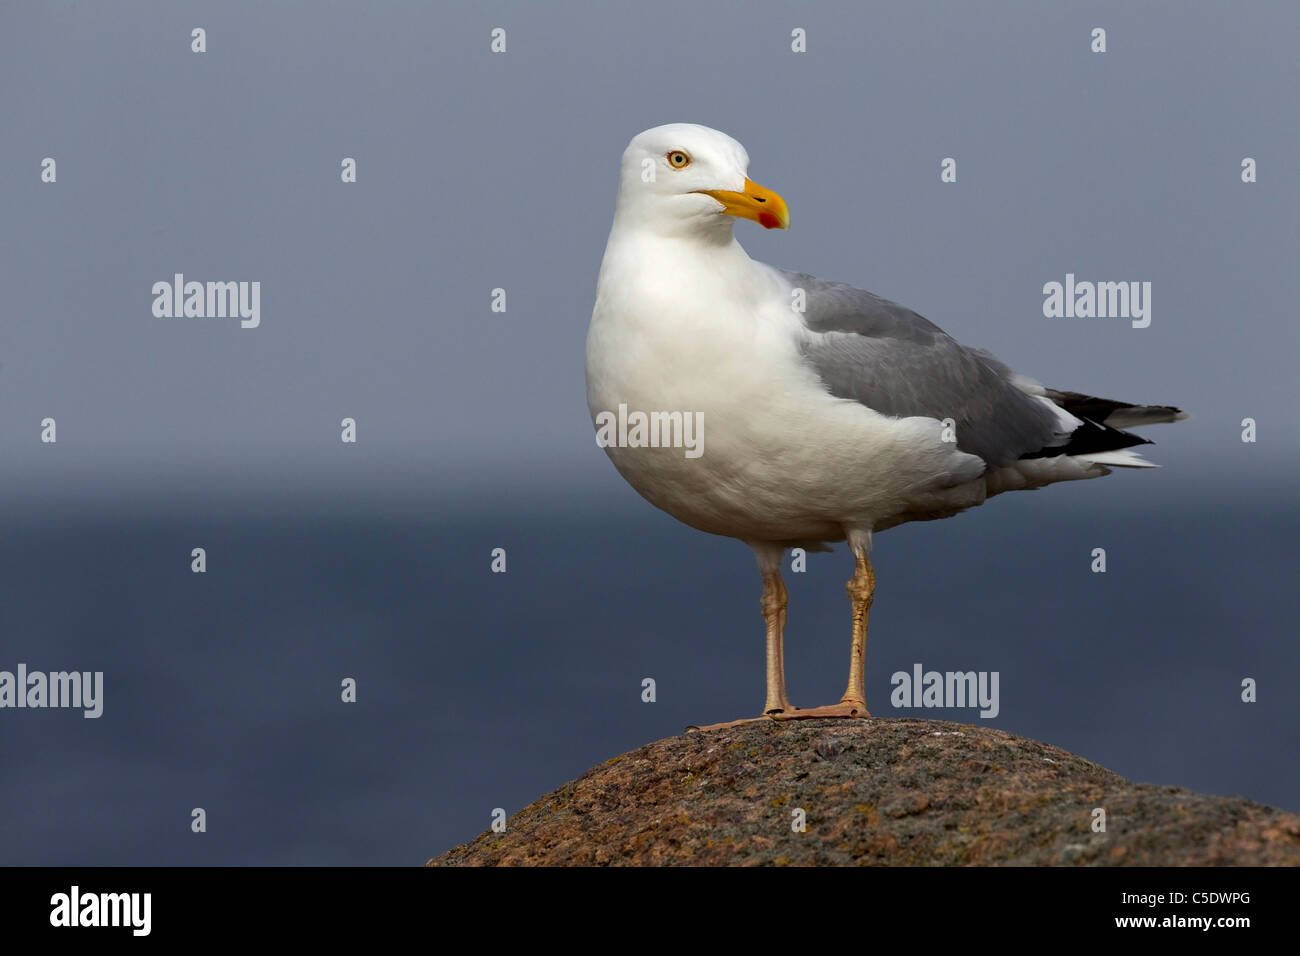 Close-up of gull standing on rock and looking away against blurred background Stock Photo